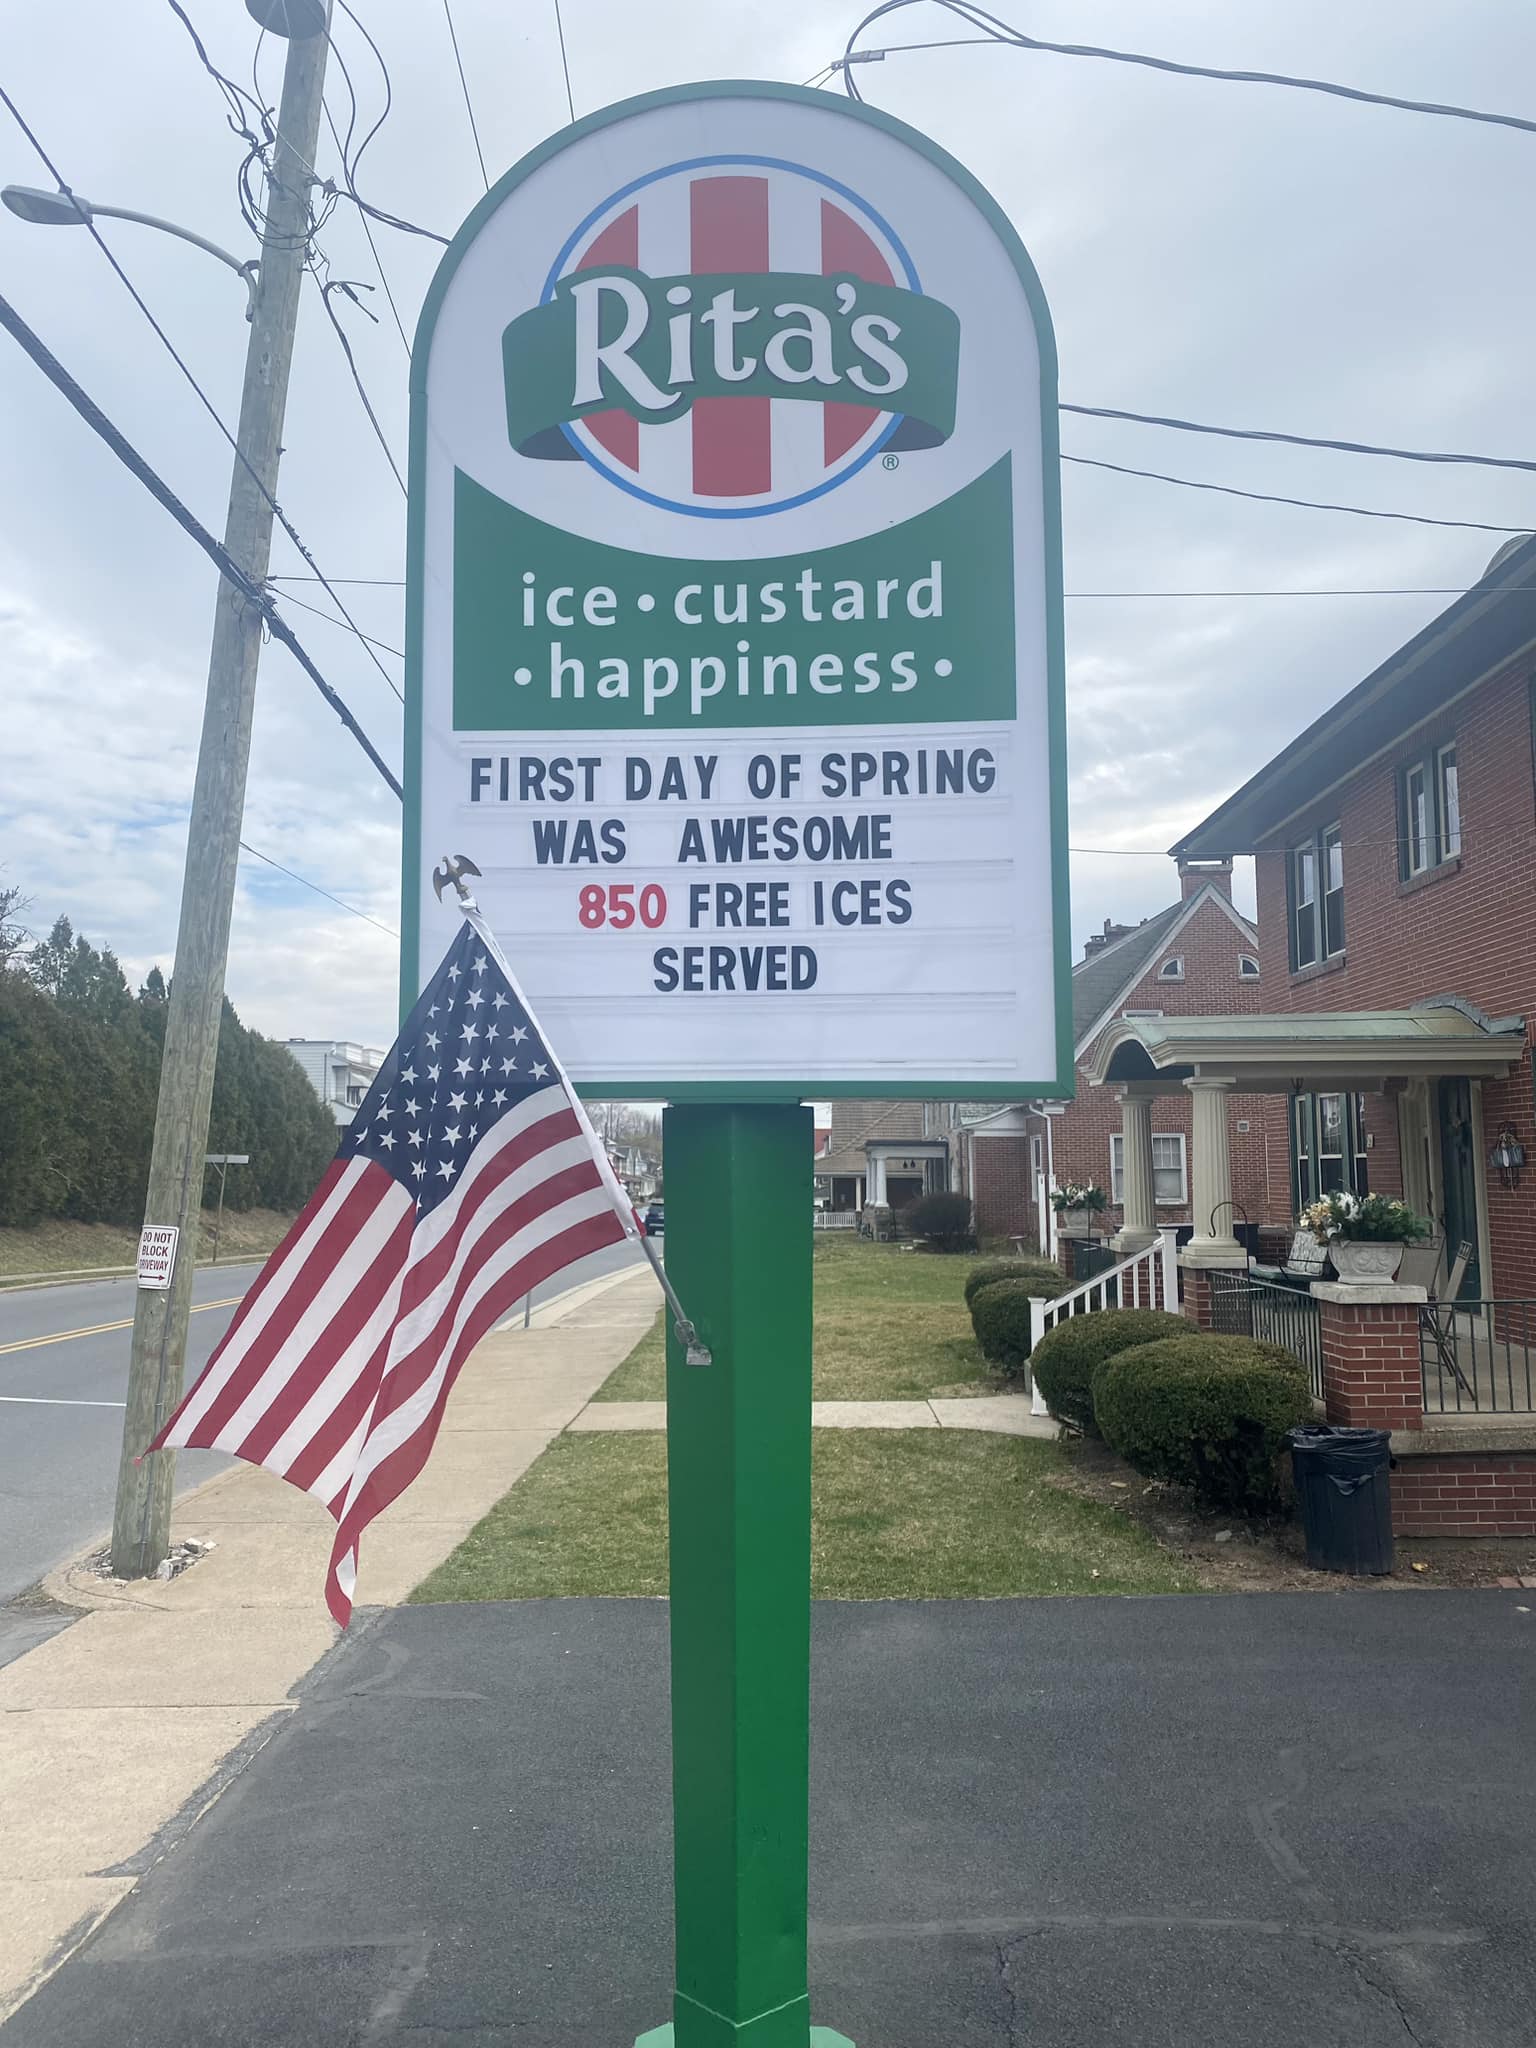 The front sign from Rita's of Hamburg. It says "First day of spring was awesome. 850 free ices served"